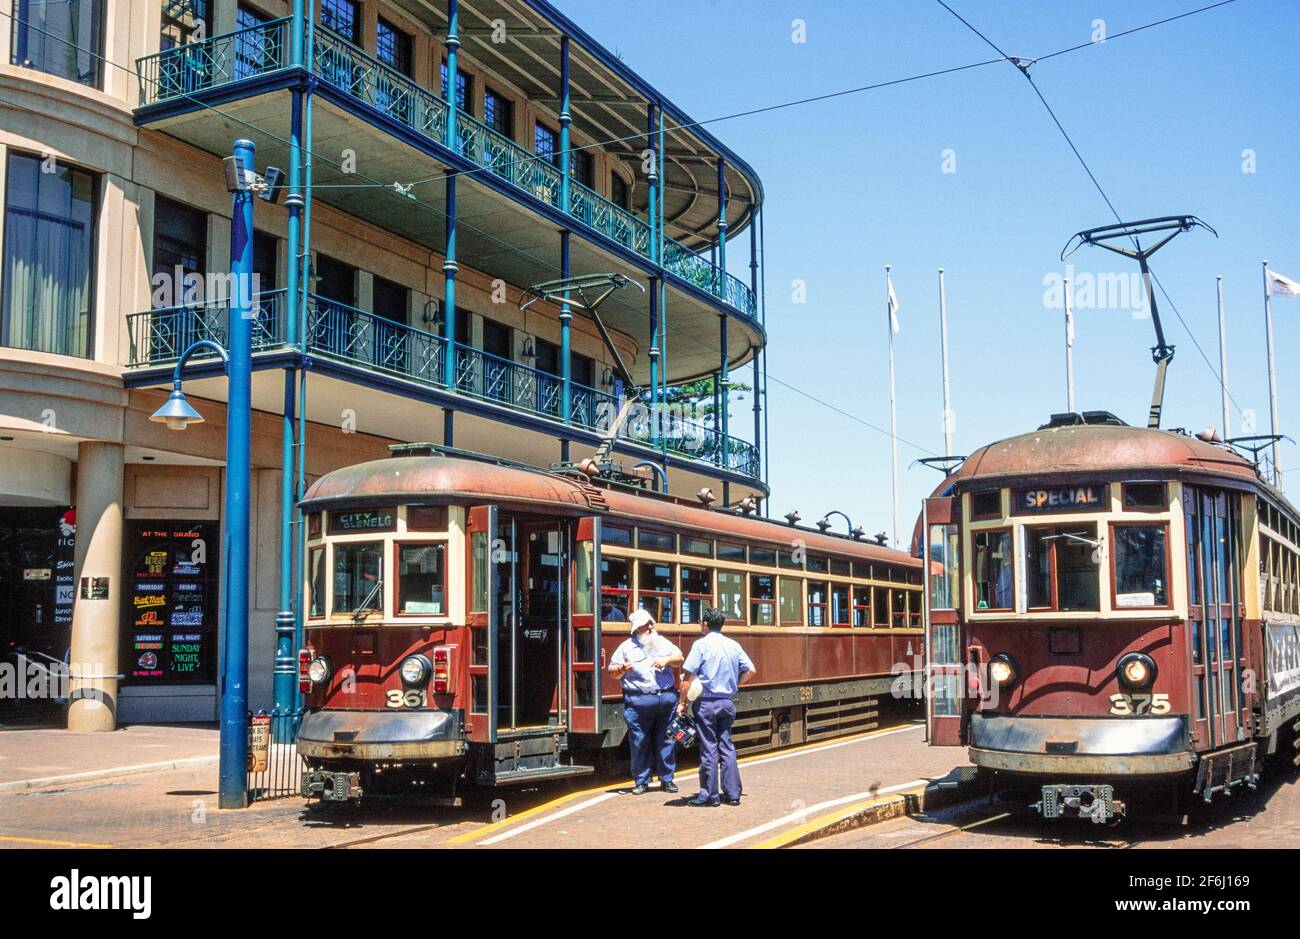 2001 Glenelg Adelaide South Australia - Old Trams at the Glenelg Tram Stop. Two H type trams wait at the Moseley Square terminus prior to the reconfiguration of the stop.The H type Adelaide tram was a class of 30 trams built by A Pengelly & Co, Adelaide in 1929 for use on the Glenelg tram line. They operated the service until replaced by Bombardier Flexity Classics in 2006.The Glenelg tram line is a tram/light rail line in Adelaide. Moseley Square is a public square in the City of Holdfast Bay at Glenelg  and it is the terminus of the Glenelg tram line Stock Photo